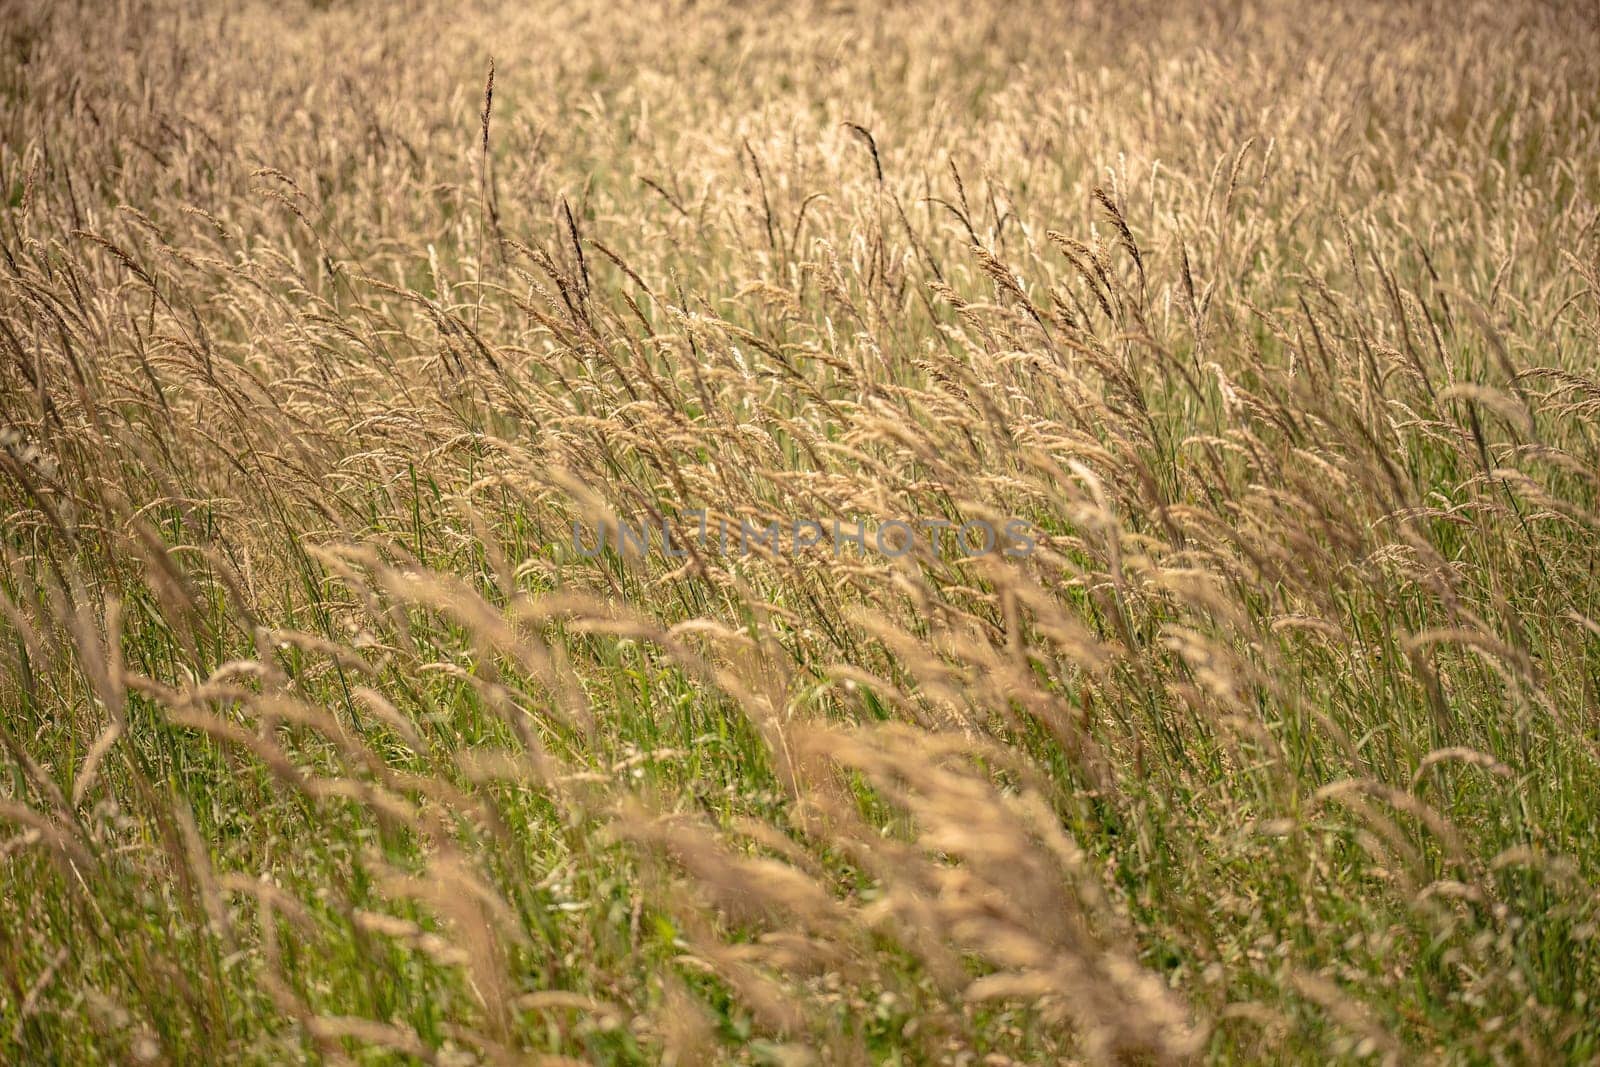 Field of Tall Grass With Foreground Focus by pippocarlot